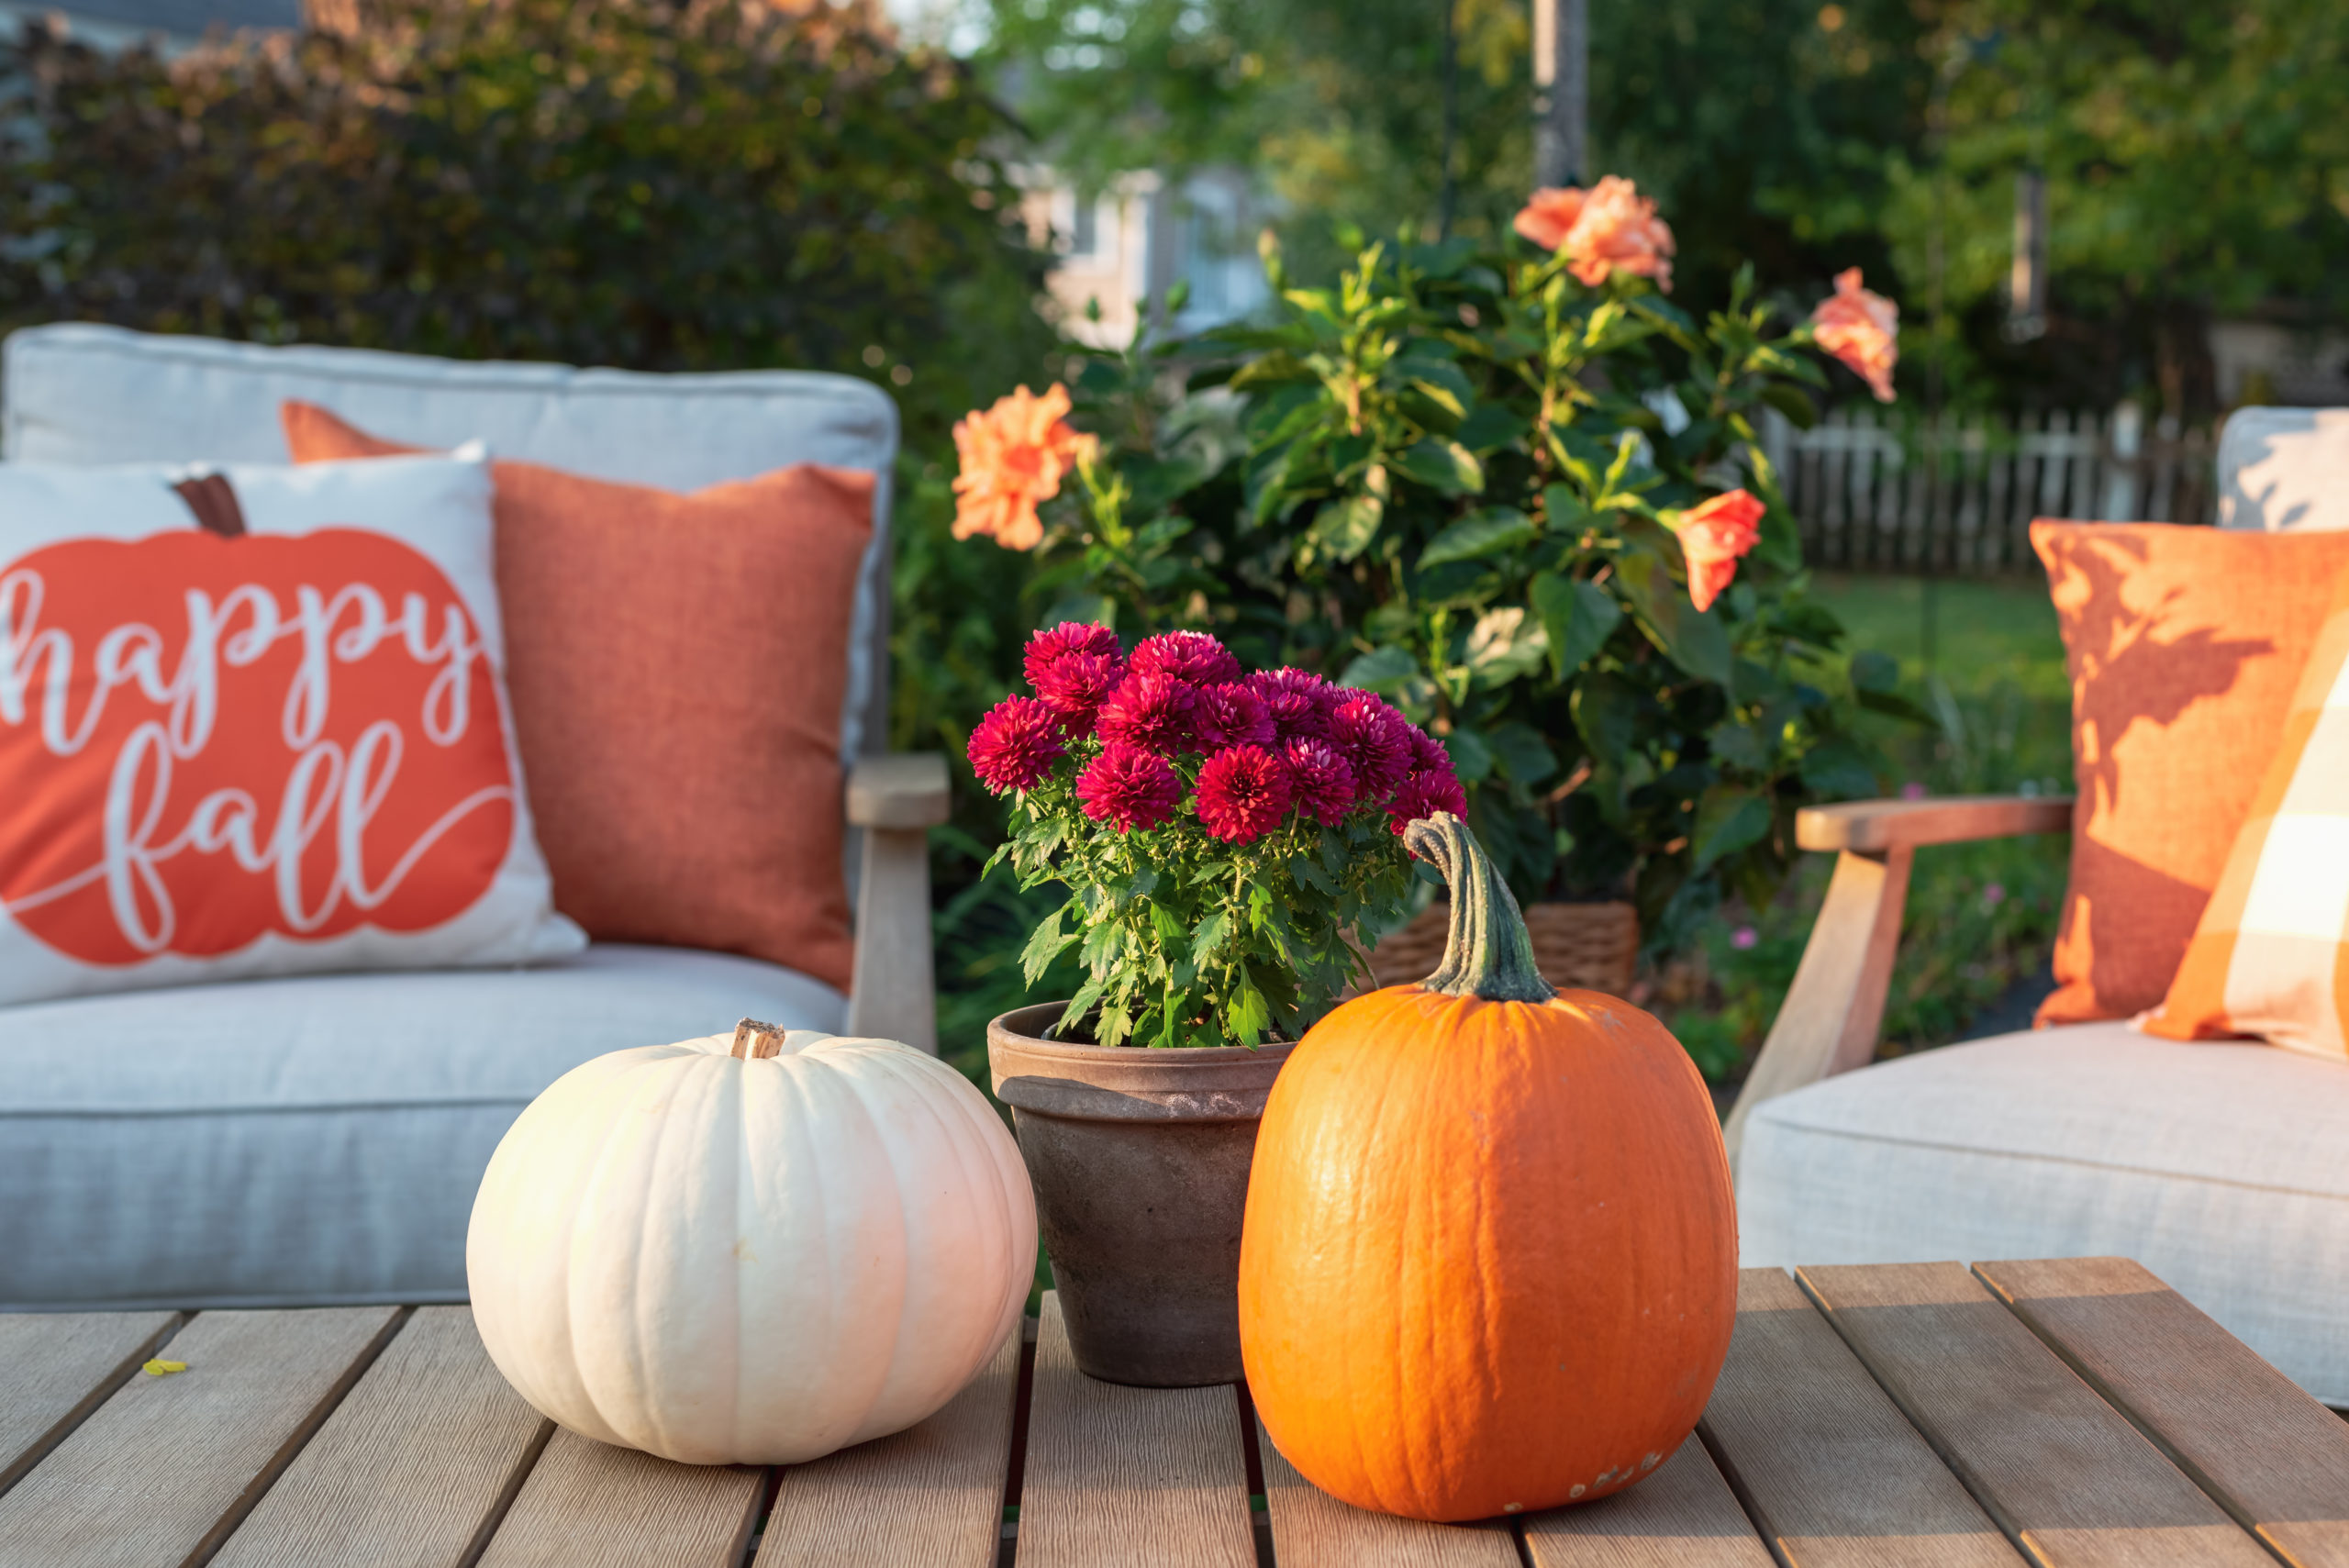 Backyard patio furniture styled for fall